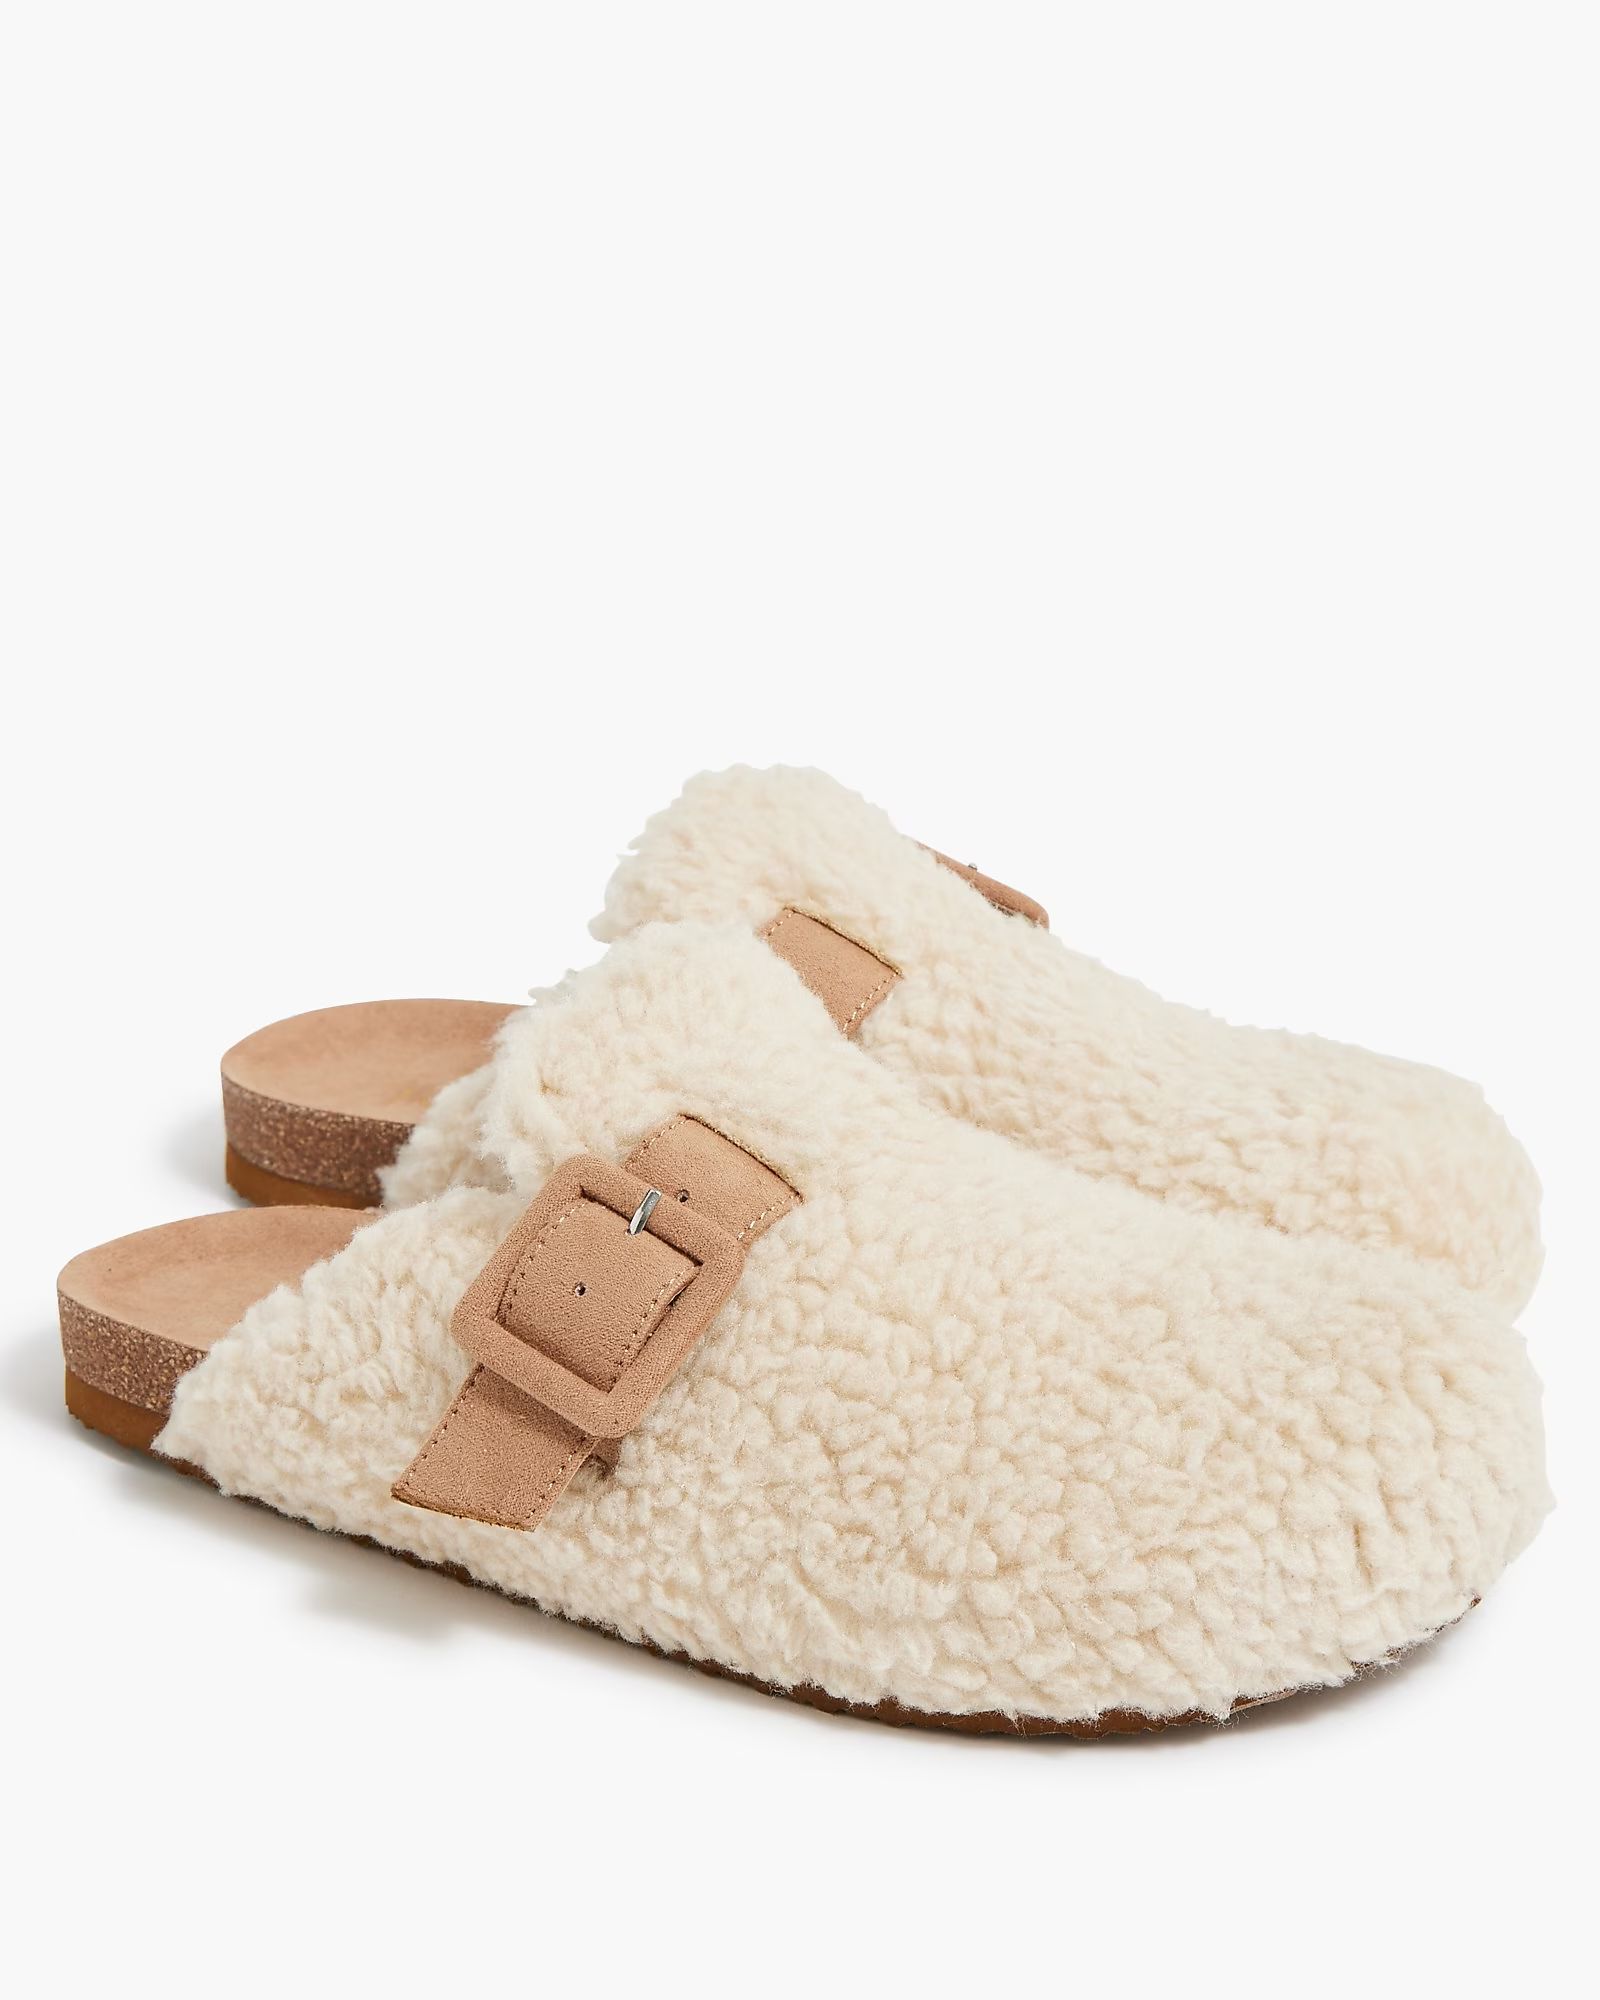 Sherpa buckle clog slippers | J.Crew Factory